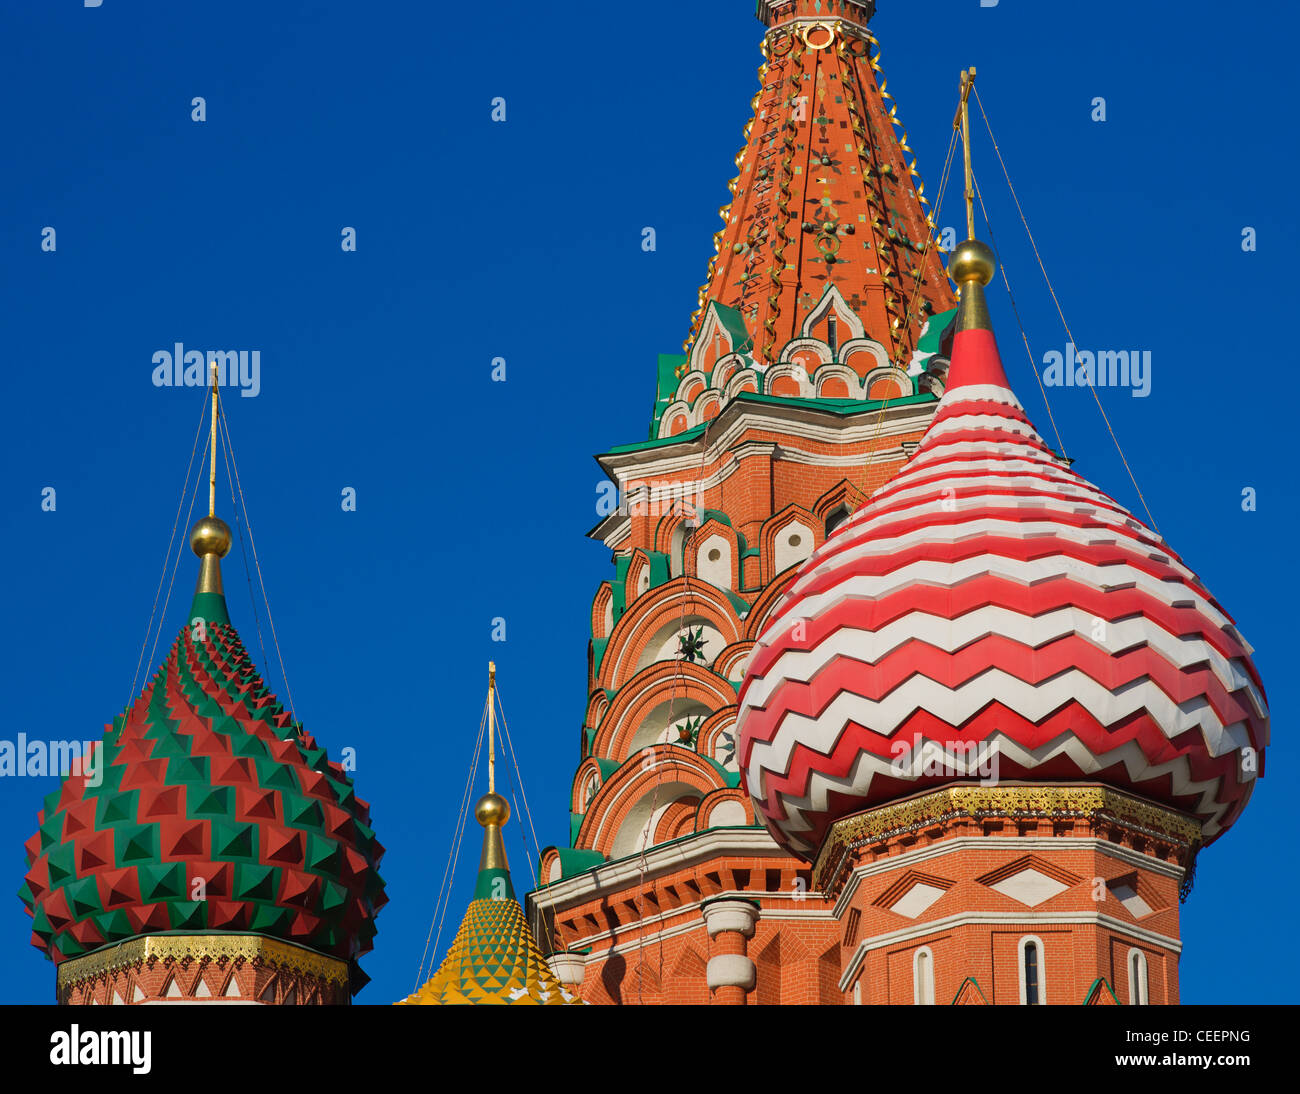 Details of the St. Basil's cathedral on Red Square of Moscow, Russia against the background of deep blue sky Stock Photo